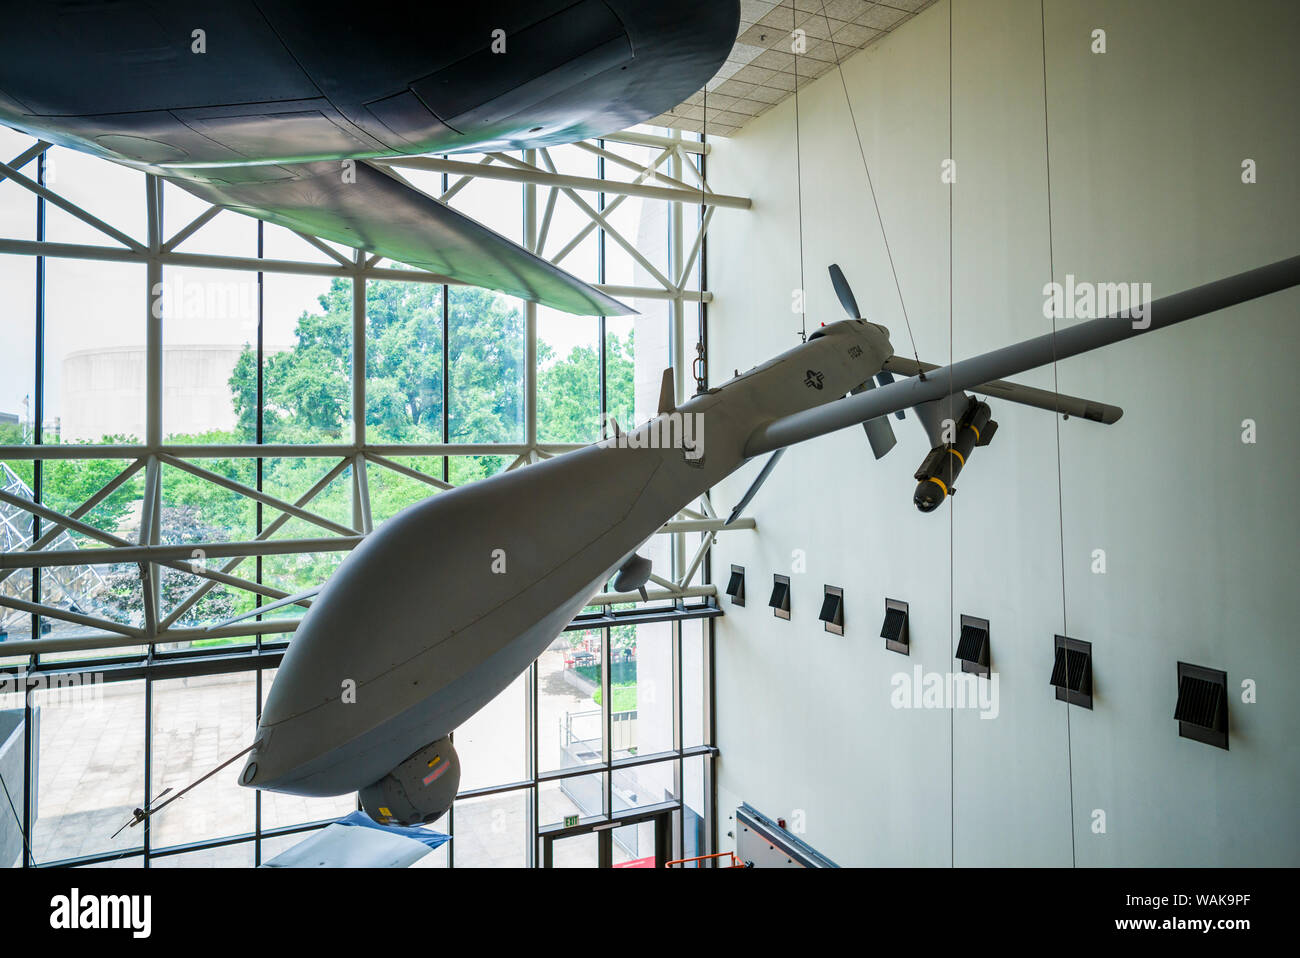 USA, Washington D.C. National Air and Space Museum, Unmanned Aviation,  RQ-3A Dark Star and MQ-1L Predator A drones (Editorial Use Only Stock Photo  - Alamy